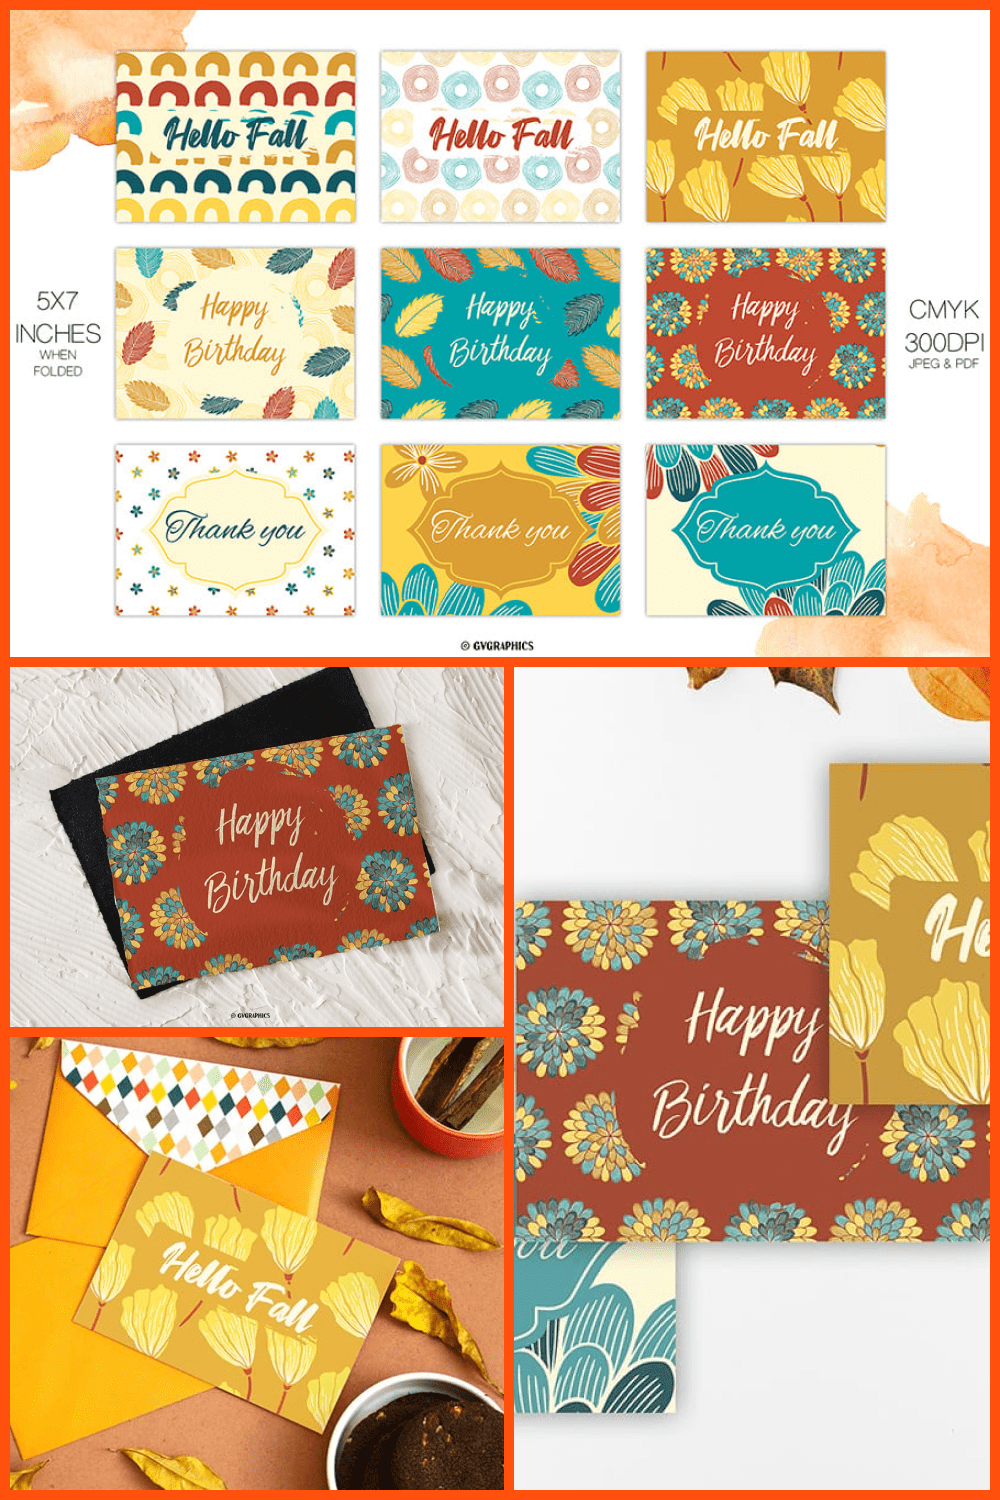 Fall Greeting Cards: Printable Thank you, Birthday, and Autumn Cards.